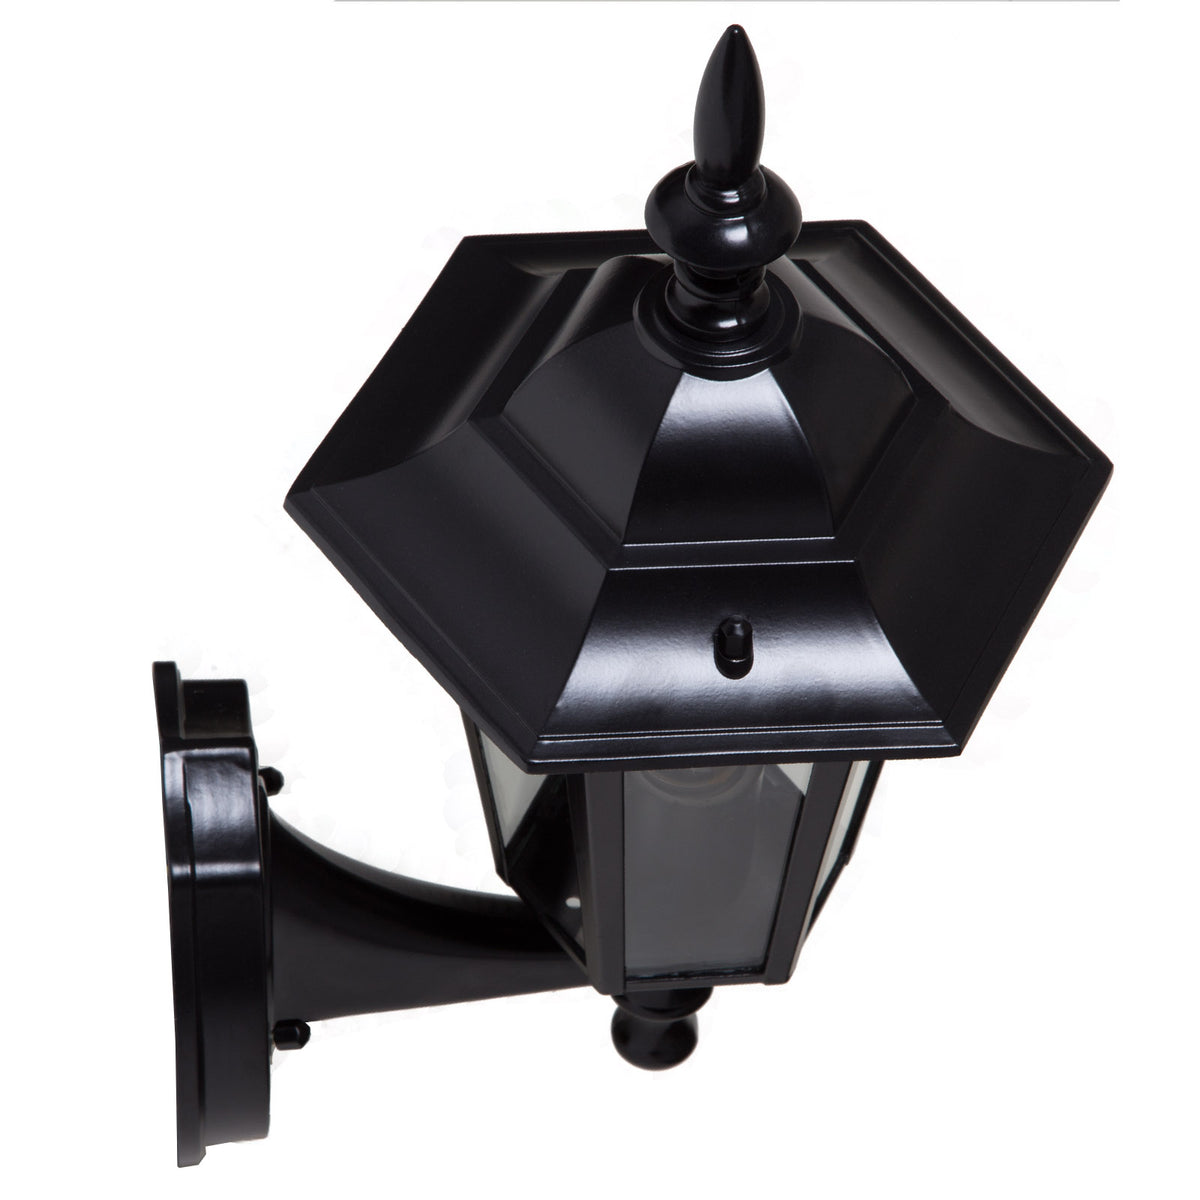 buy wall mount light fixtures at cheap rate in bulk. wholesale & retail lighting goods & supplies store. home décor ideas, maintenance, repair replacement parts